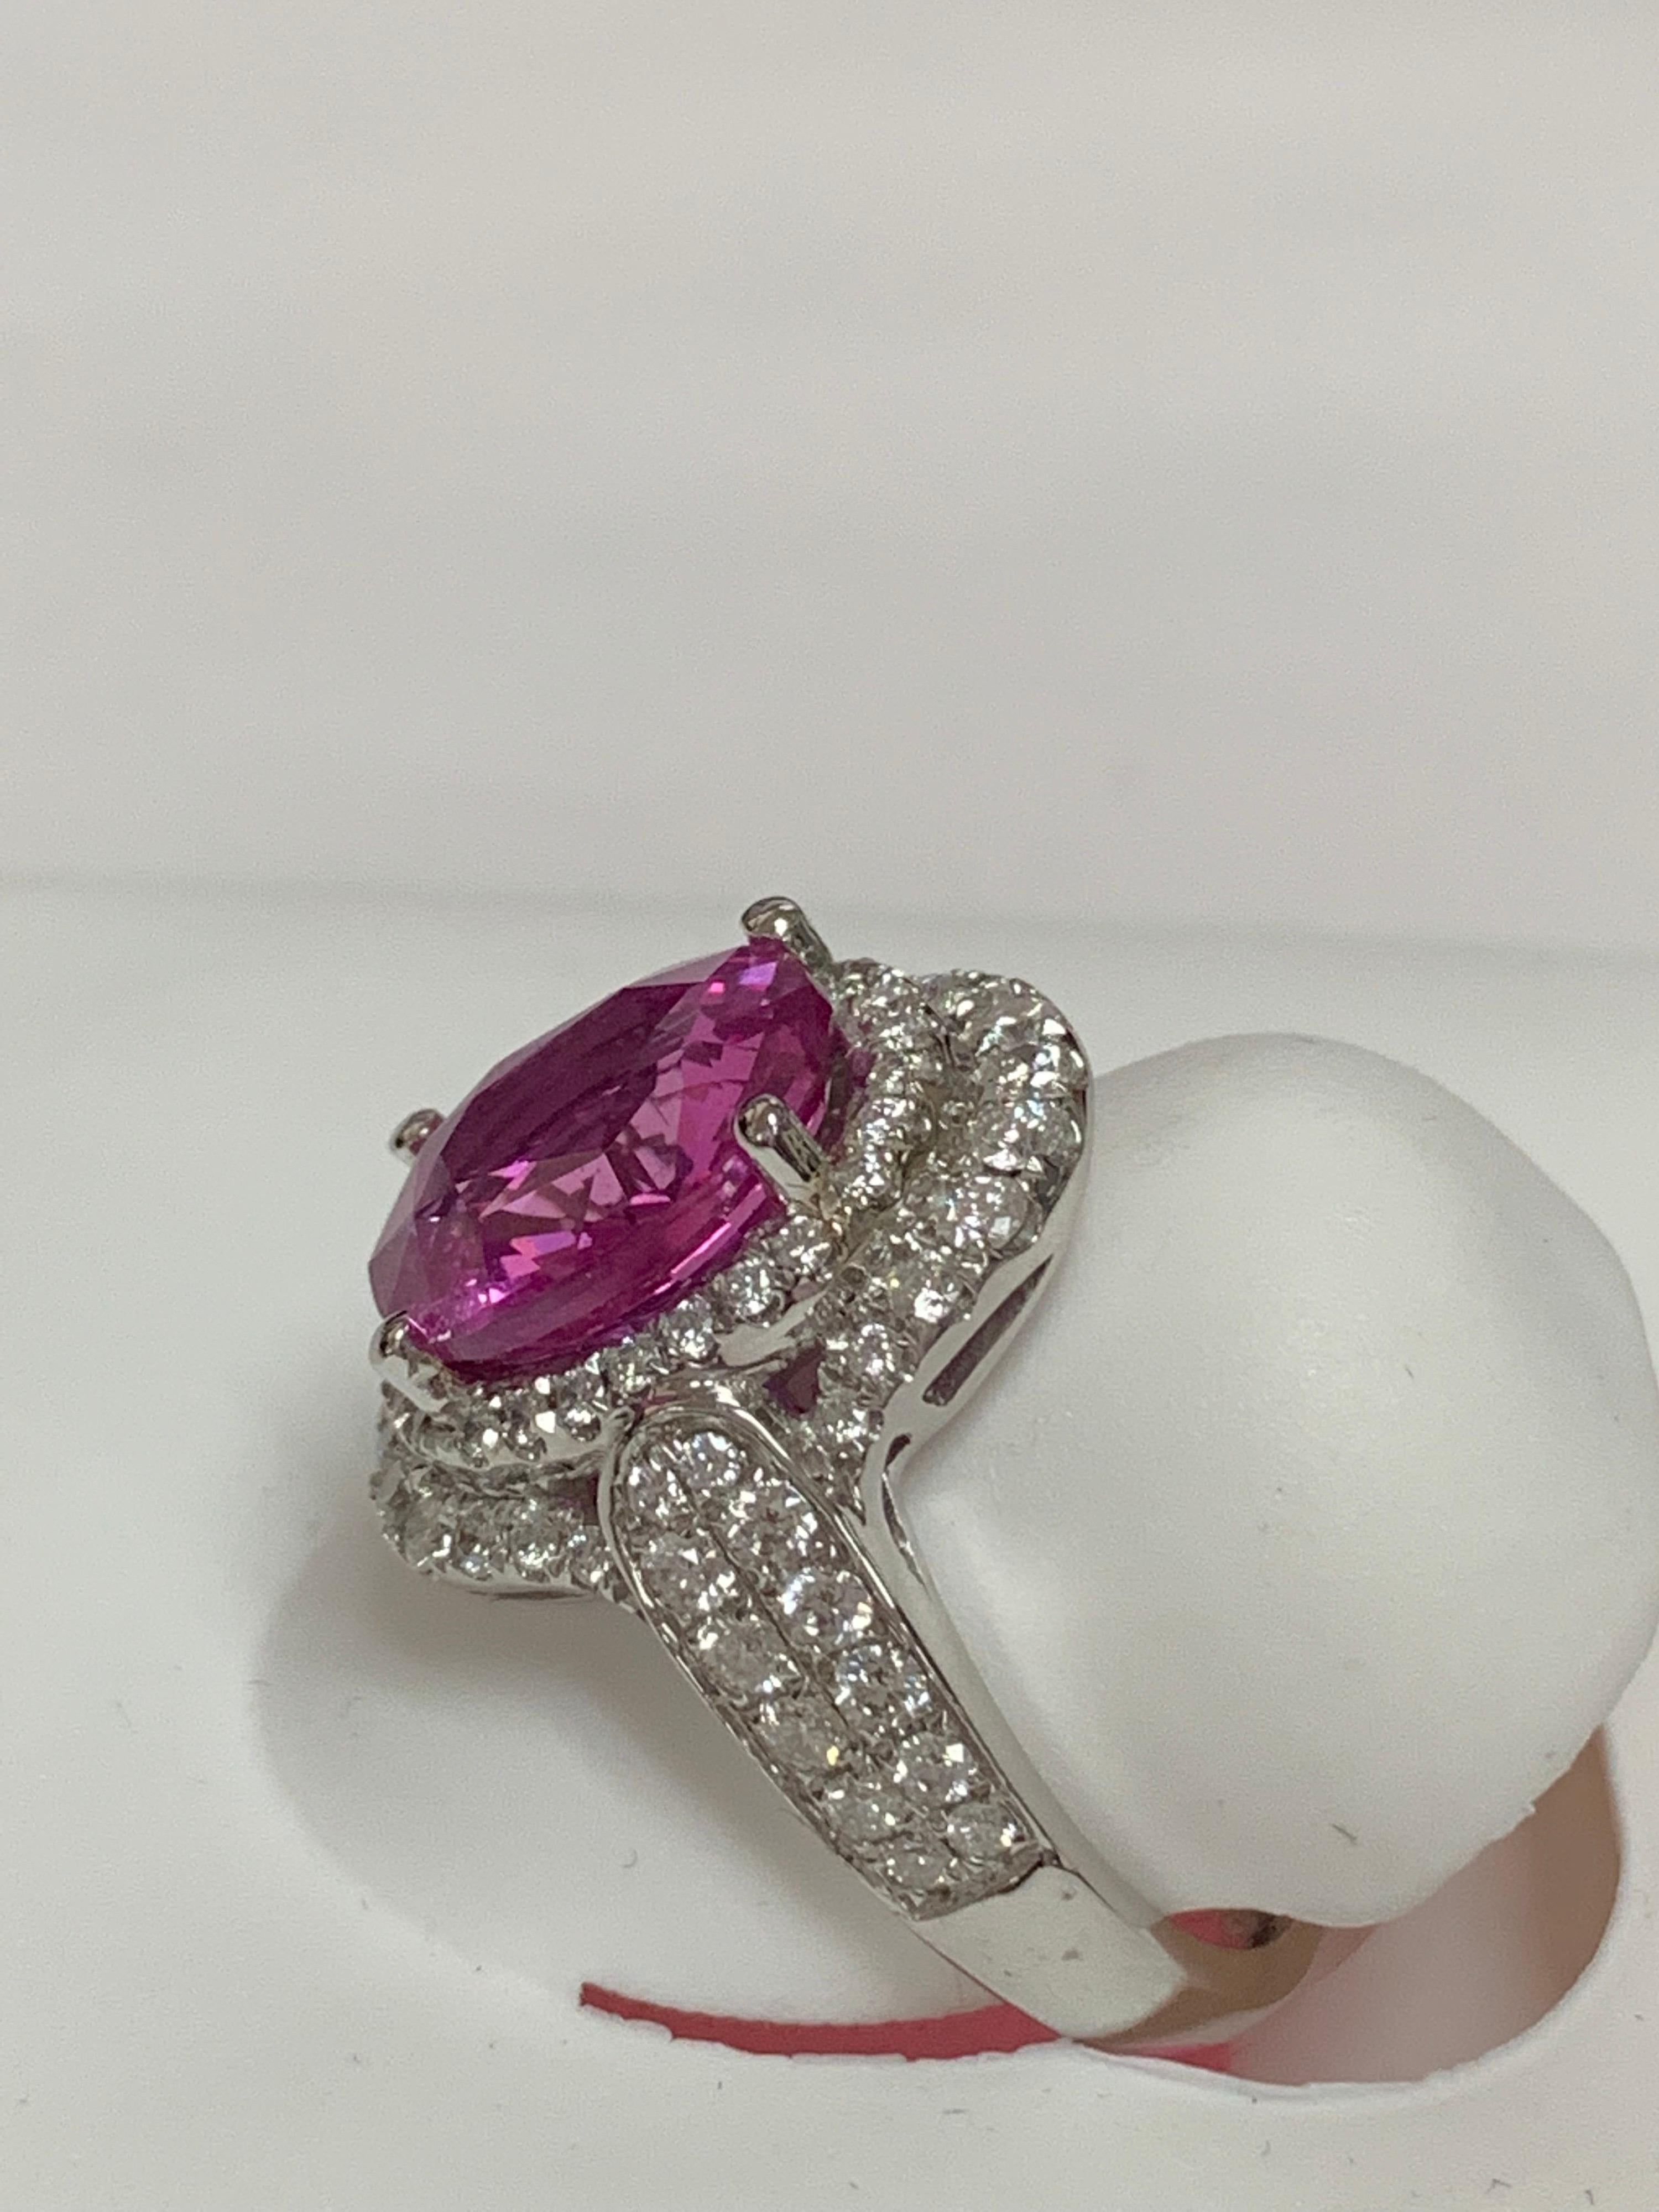 Oval Cut GIA Certified 5.12 Carat Pink sapphire and Diamonds Ring